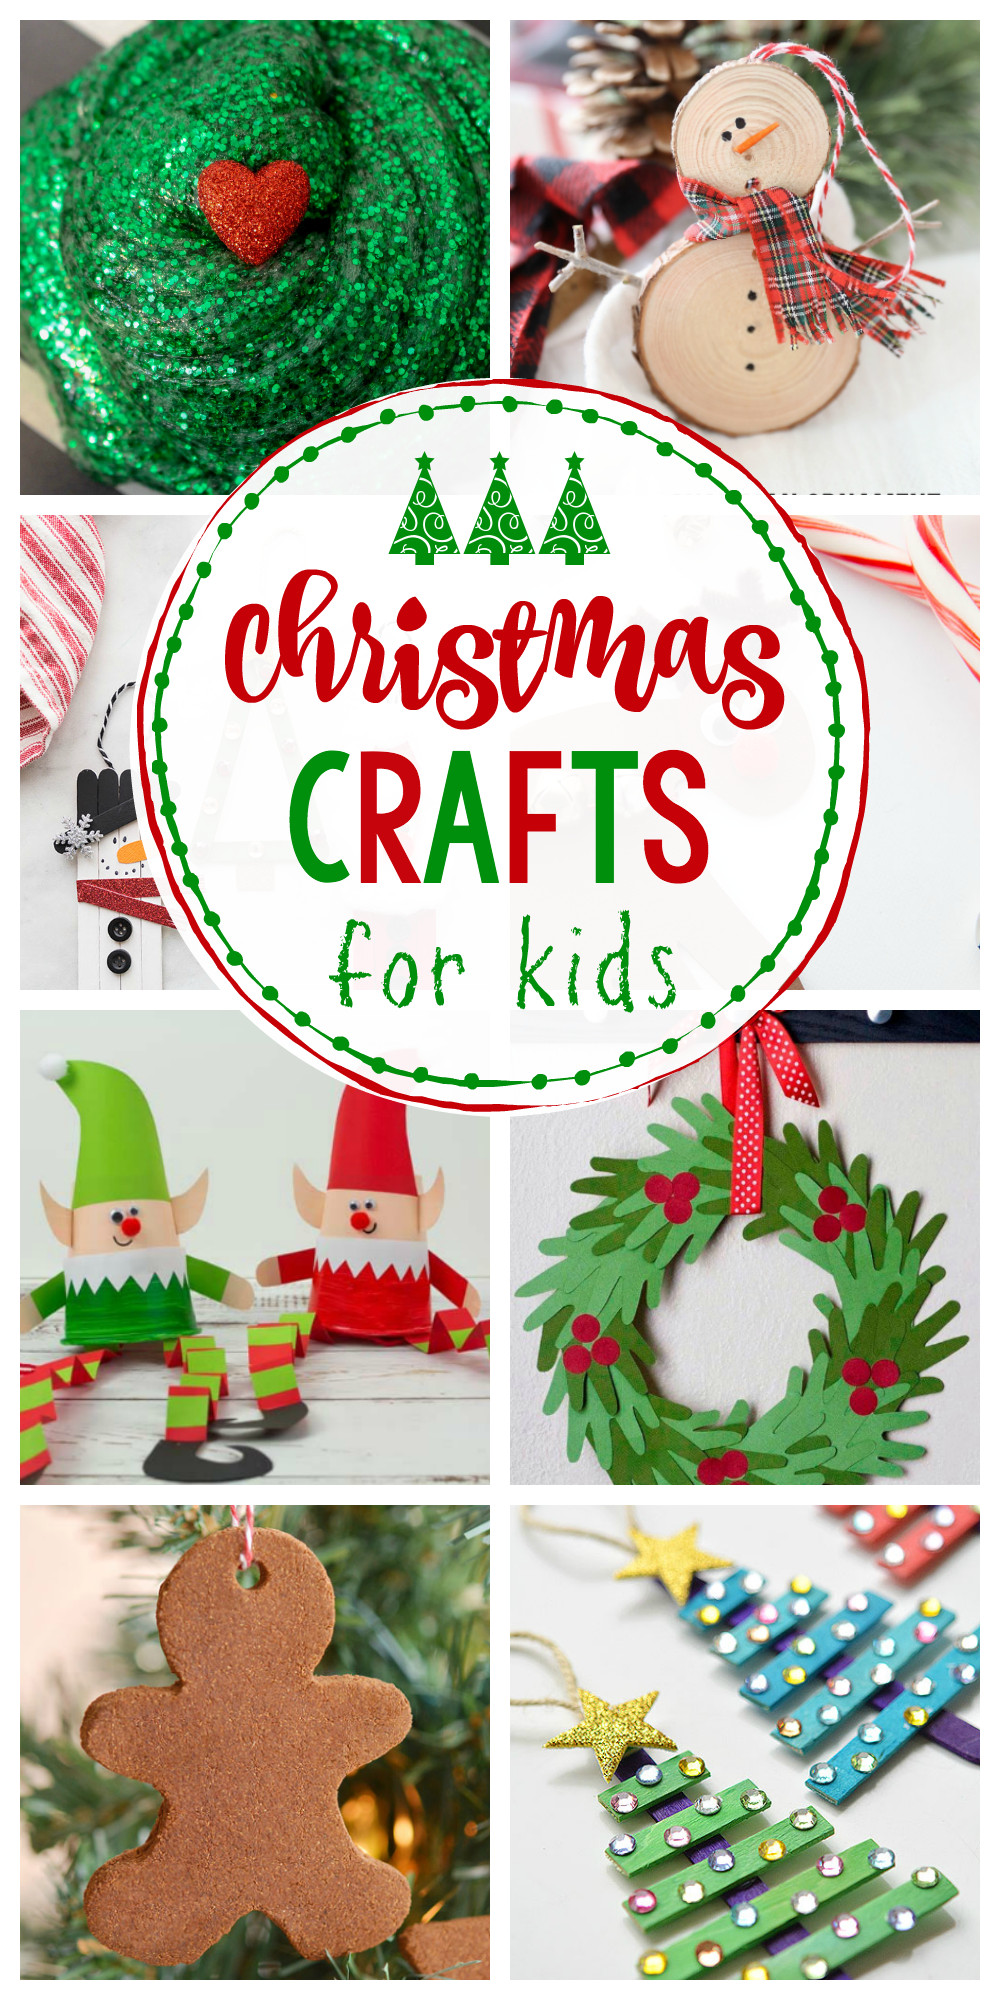 Simple Christmas Crafts For Kids
 25 Easy Christmas Crafts for Kids Crazy Little Projects